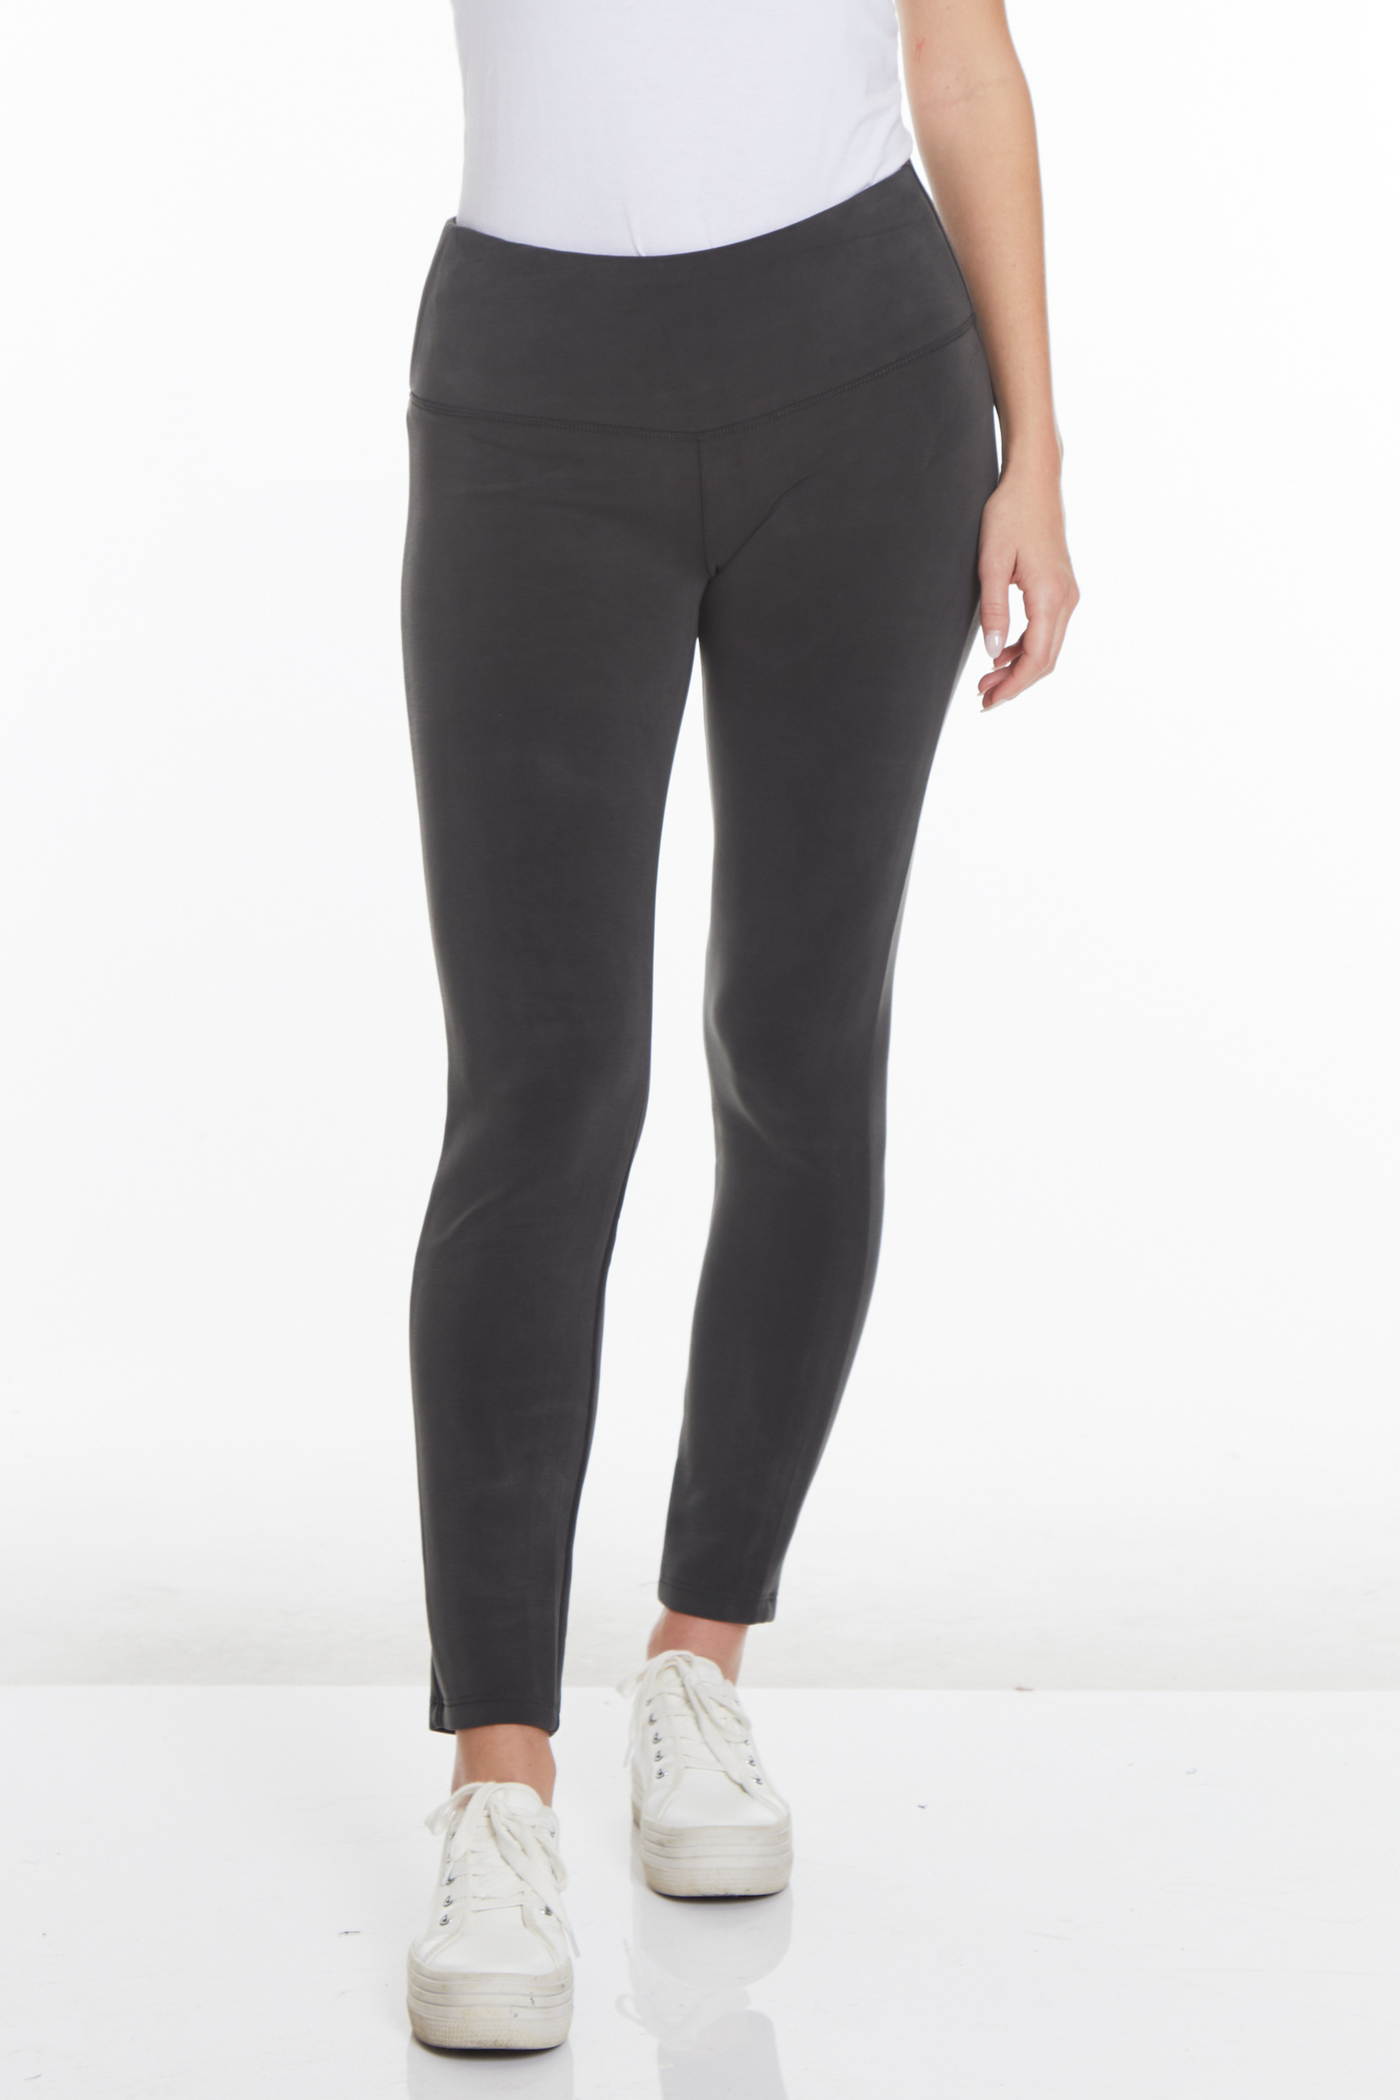 WIDE BAND PULL-ON ANKLE LEGGING - Intense Gray